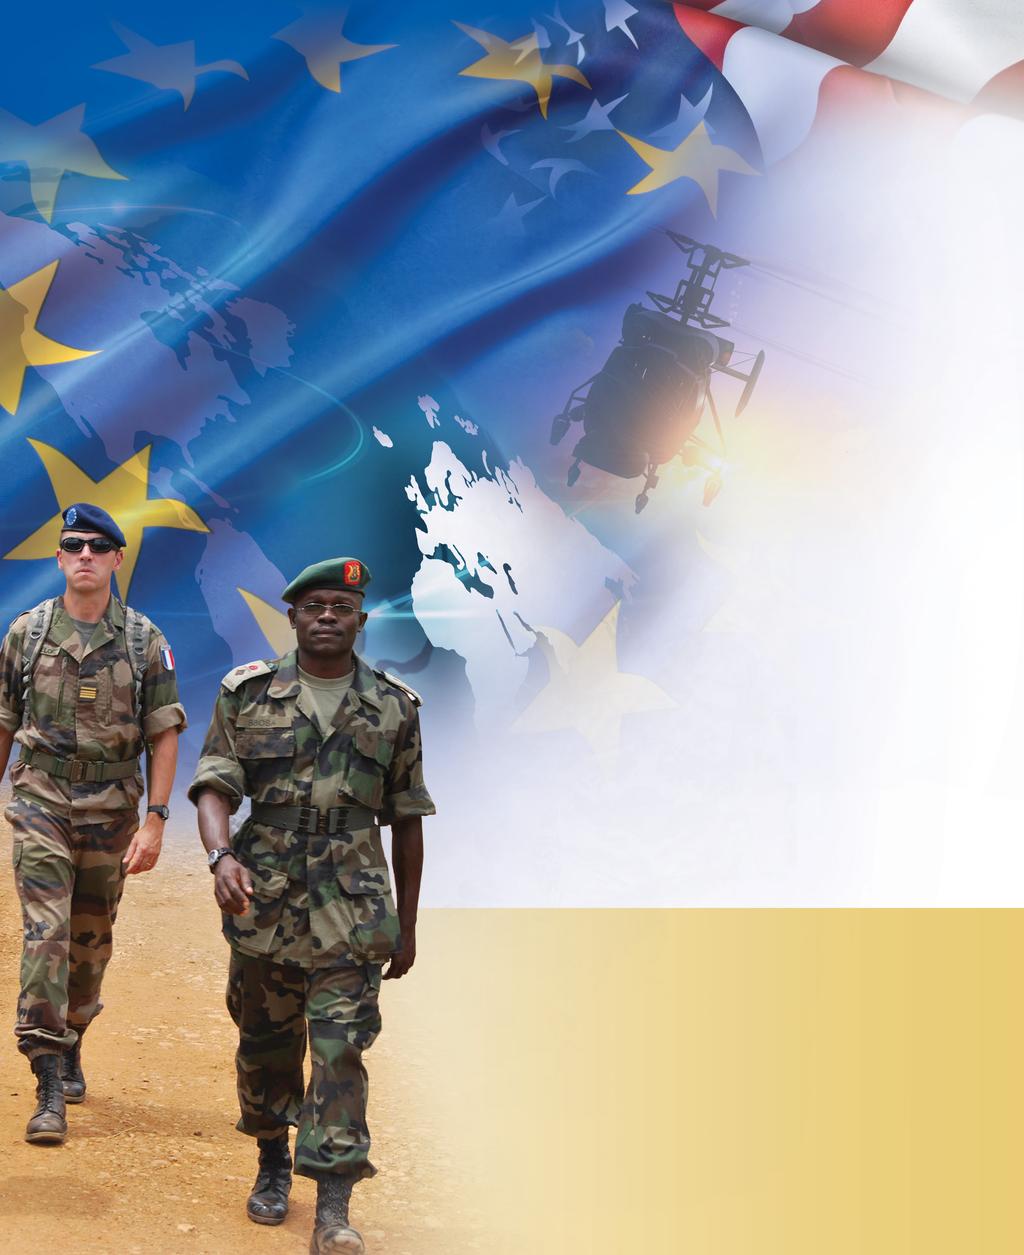 The EU s Common Security and Defense Policy Transatlantic Partners in Global Security In today s world no power can be assumed to be self-sufficient on security issues.